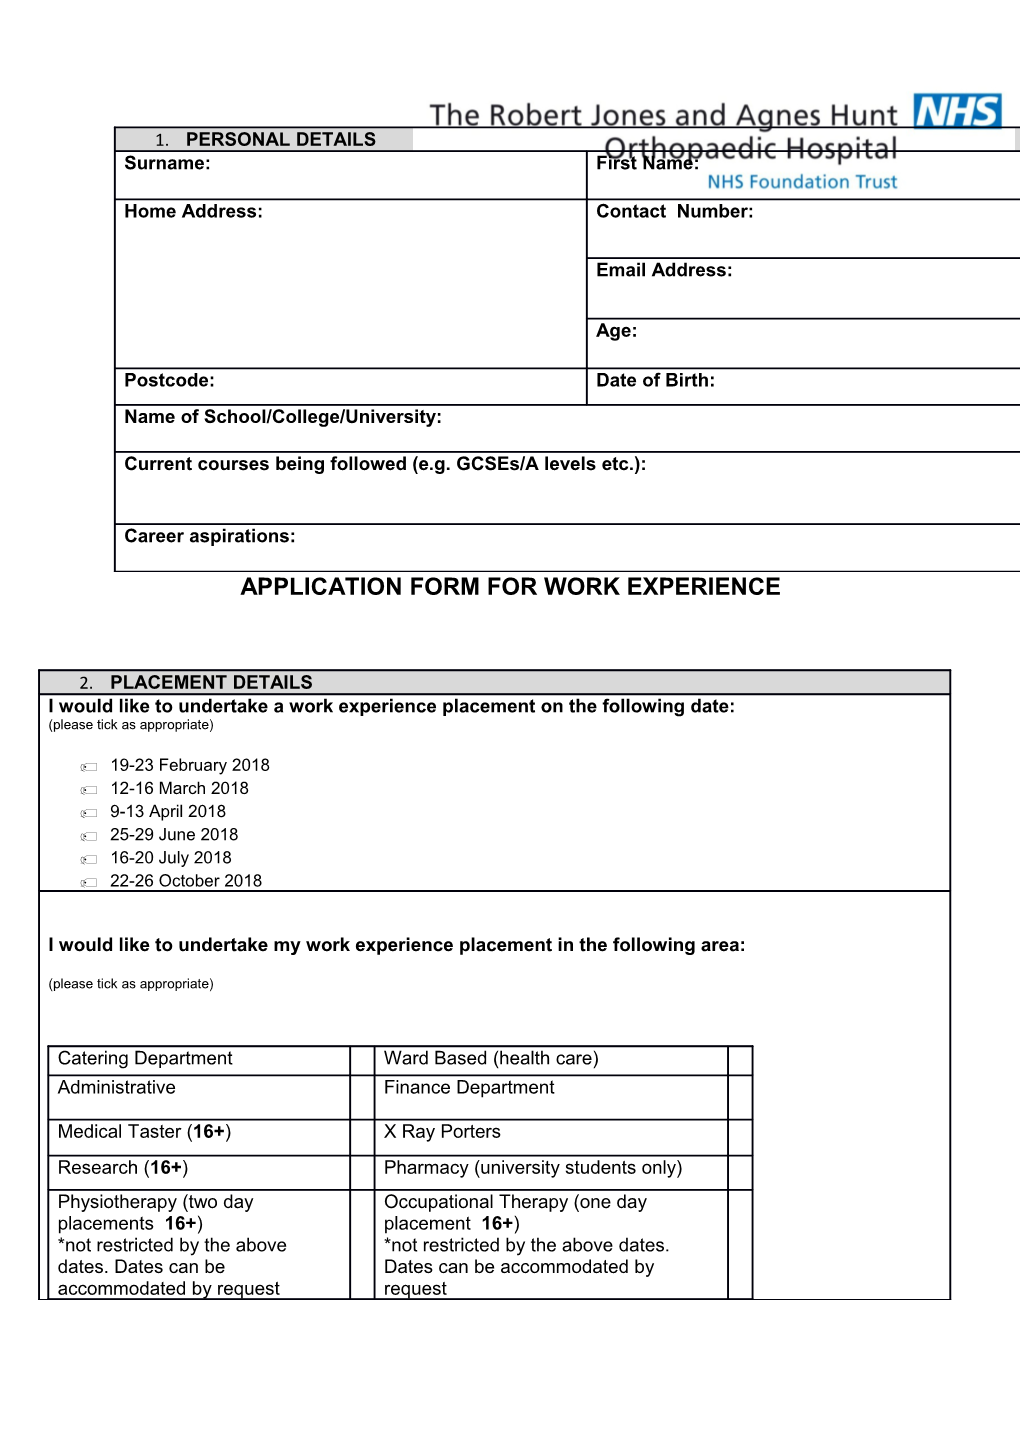 Application Form for Work Experience